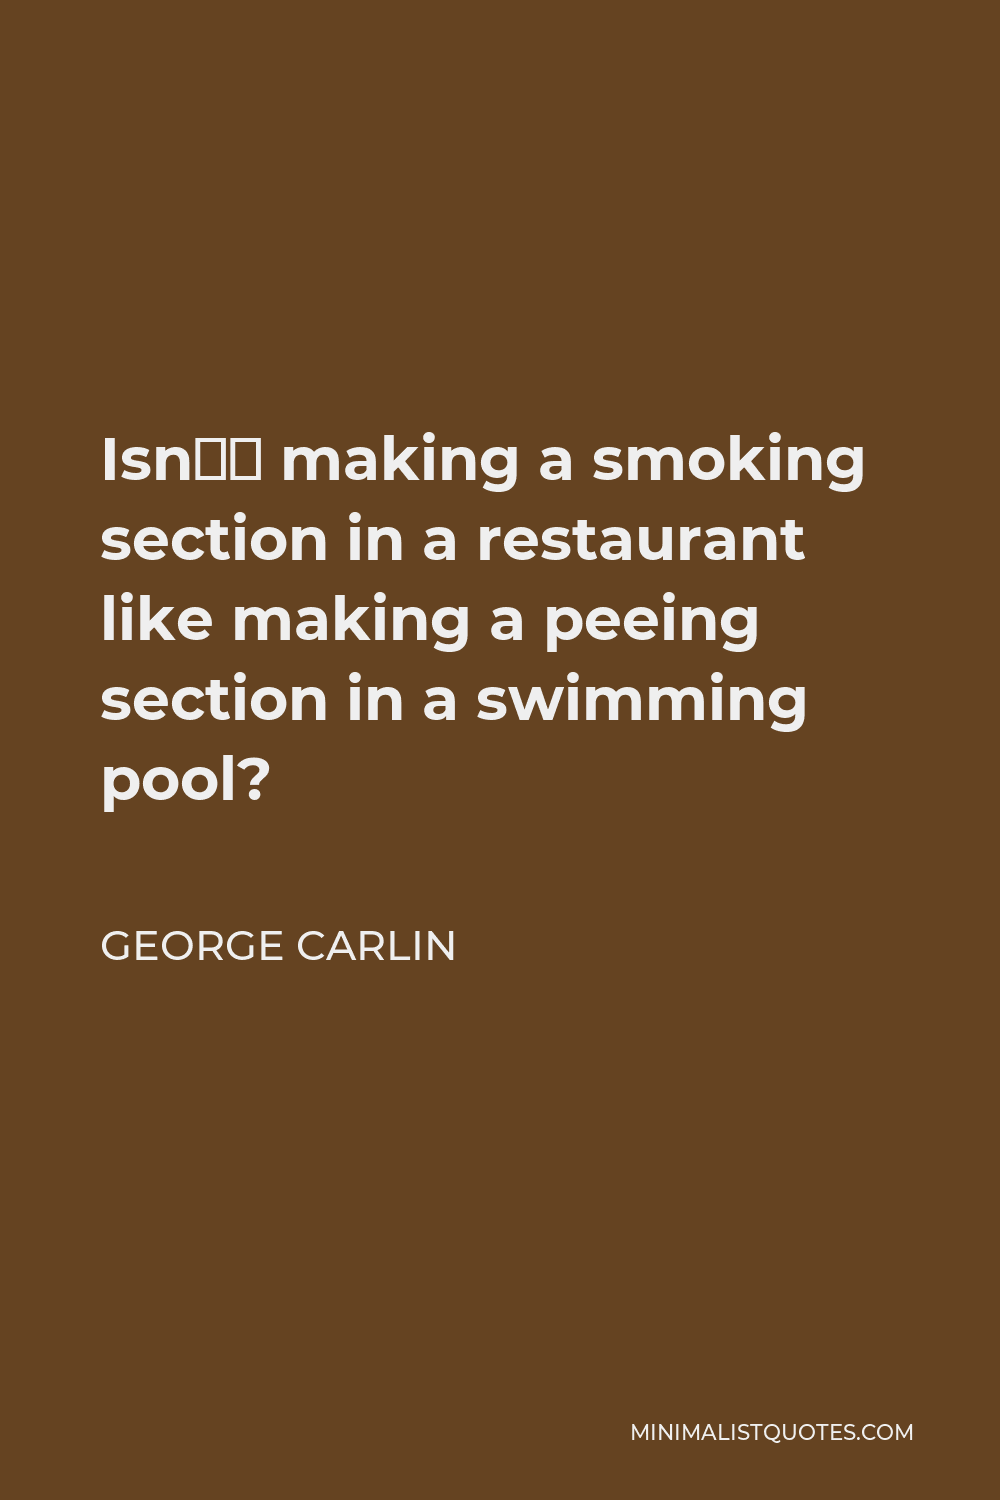 George Carlin Quote - Isn’t making a smoking section in a restaurant like making a peeing section in a swimming pool?